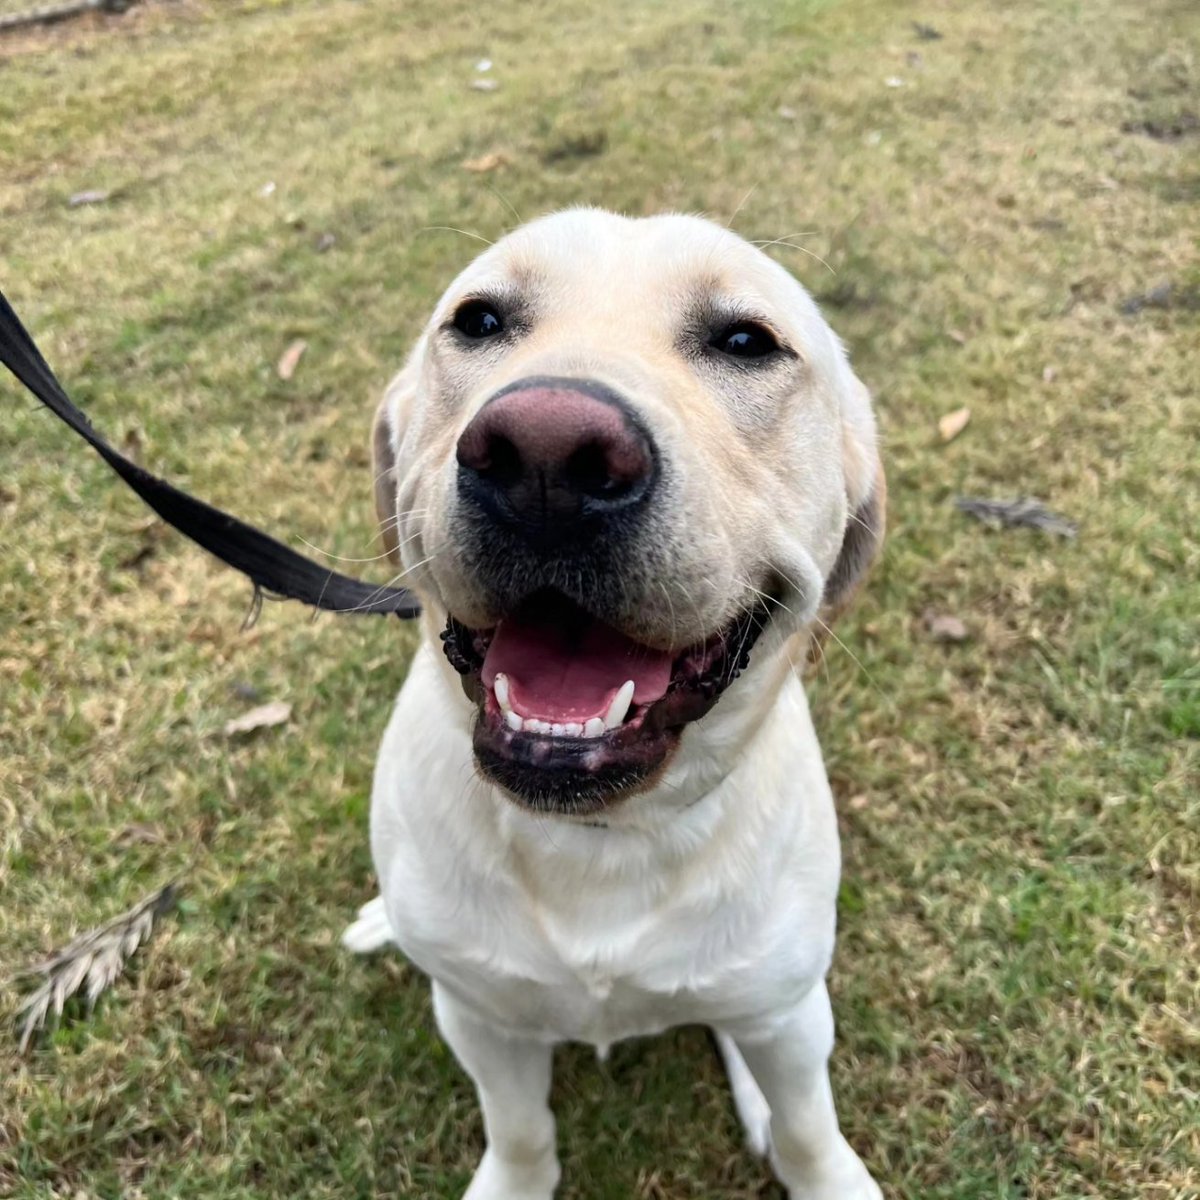 It was goodbye today to Walken as we dropped him off at @GuideDogsAUS for his next adventure. It's been a pleasure and an honour to have him as part of our family. #guidedogsnswact
#servicedogs #labrador 
#dogsofinstagram #guidedogsaustralia